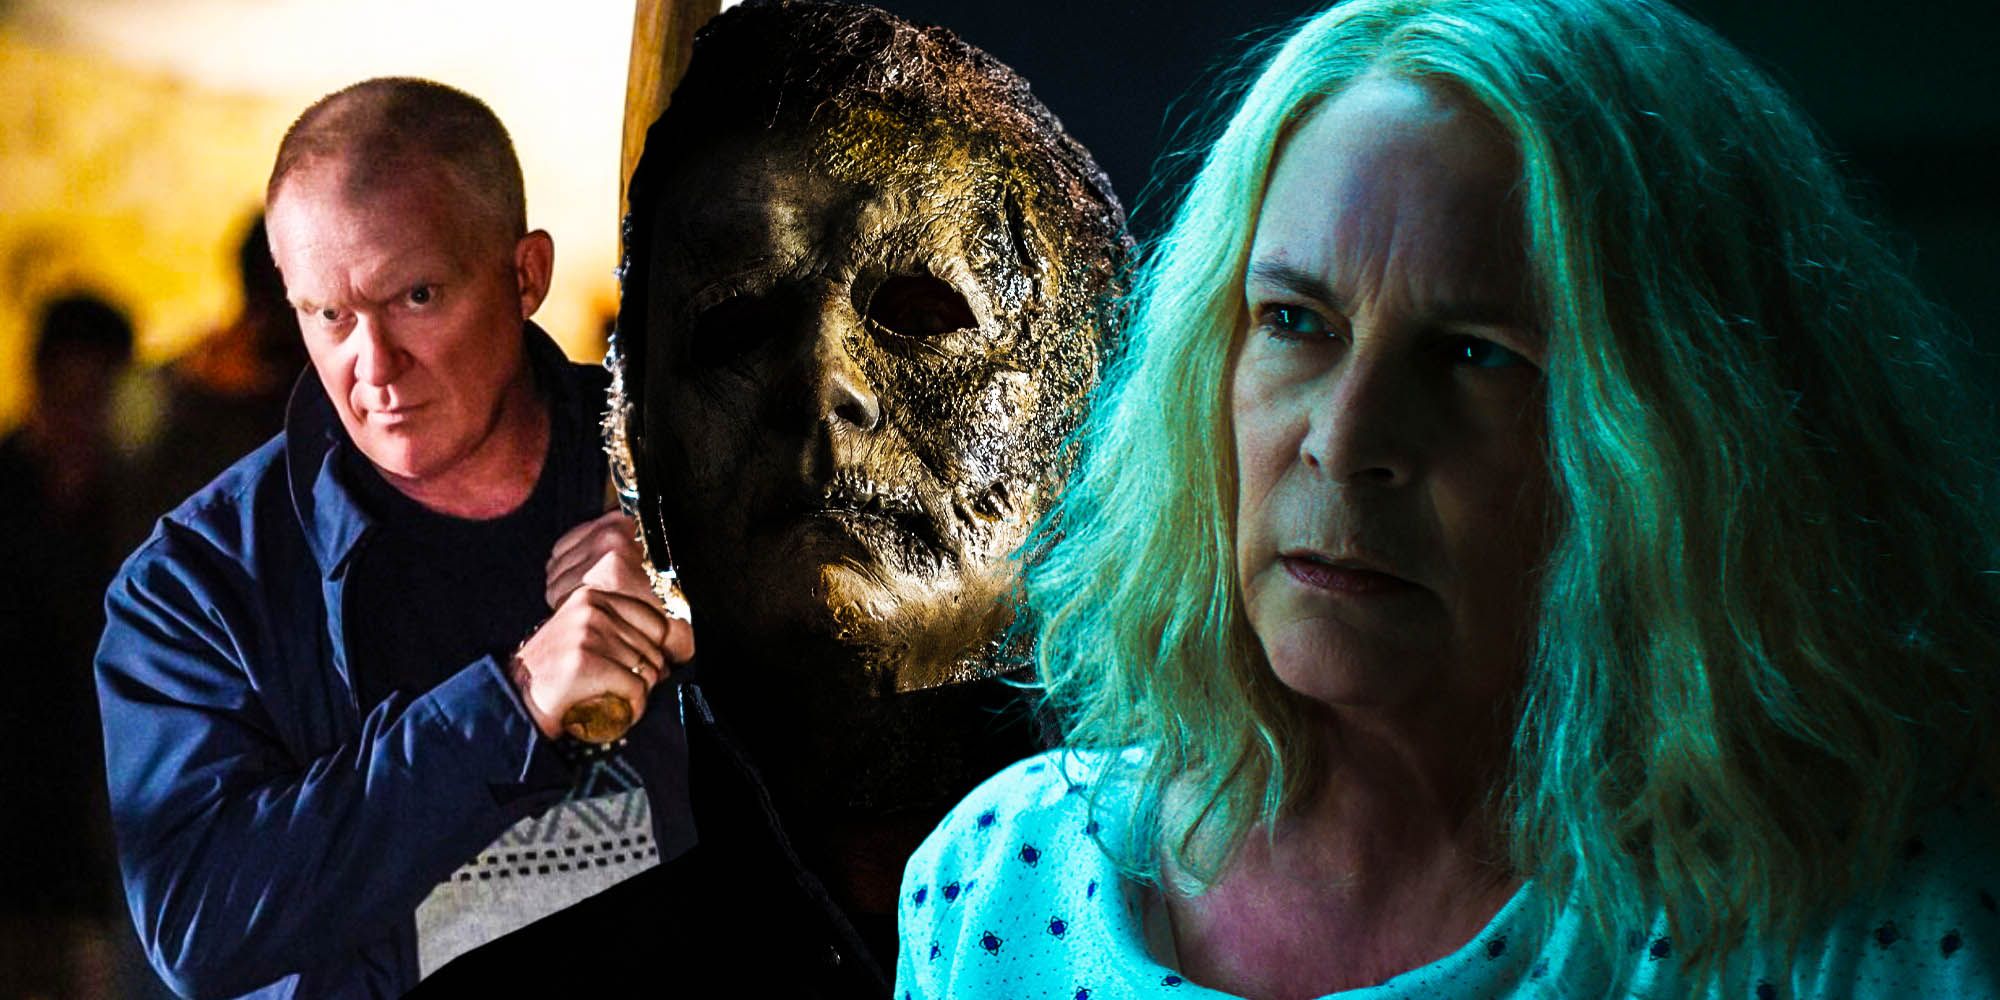 Halloween kills hero problem Laurie strode Michael myers Tommy doyle